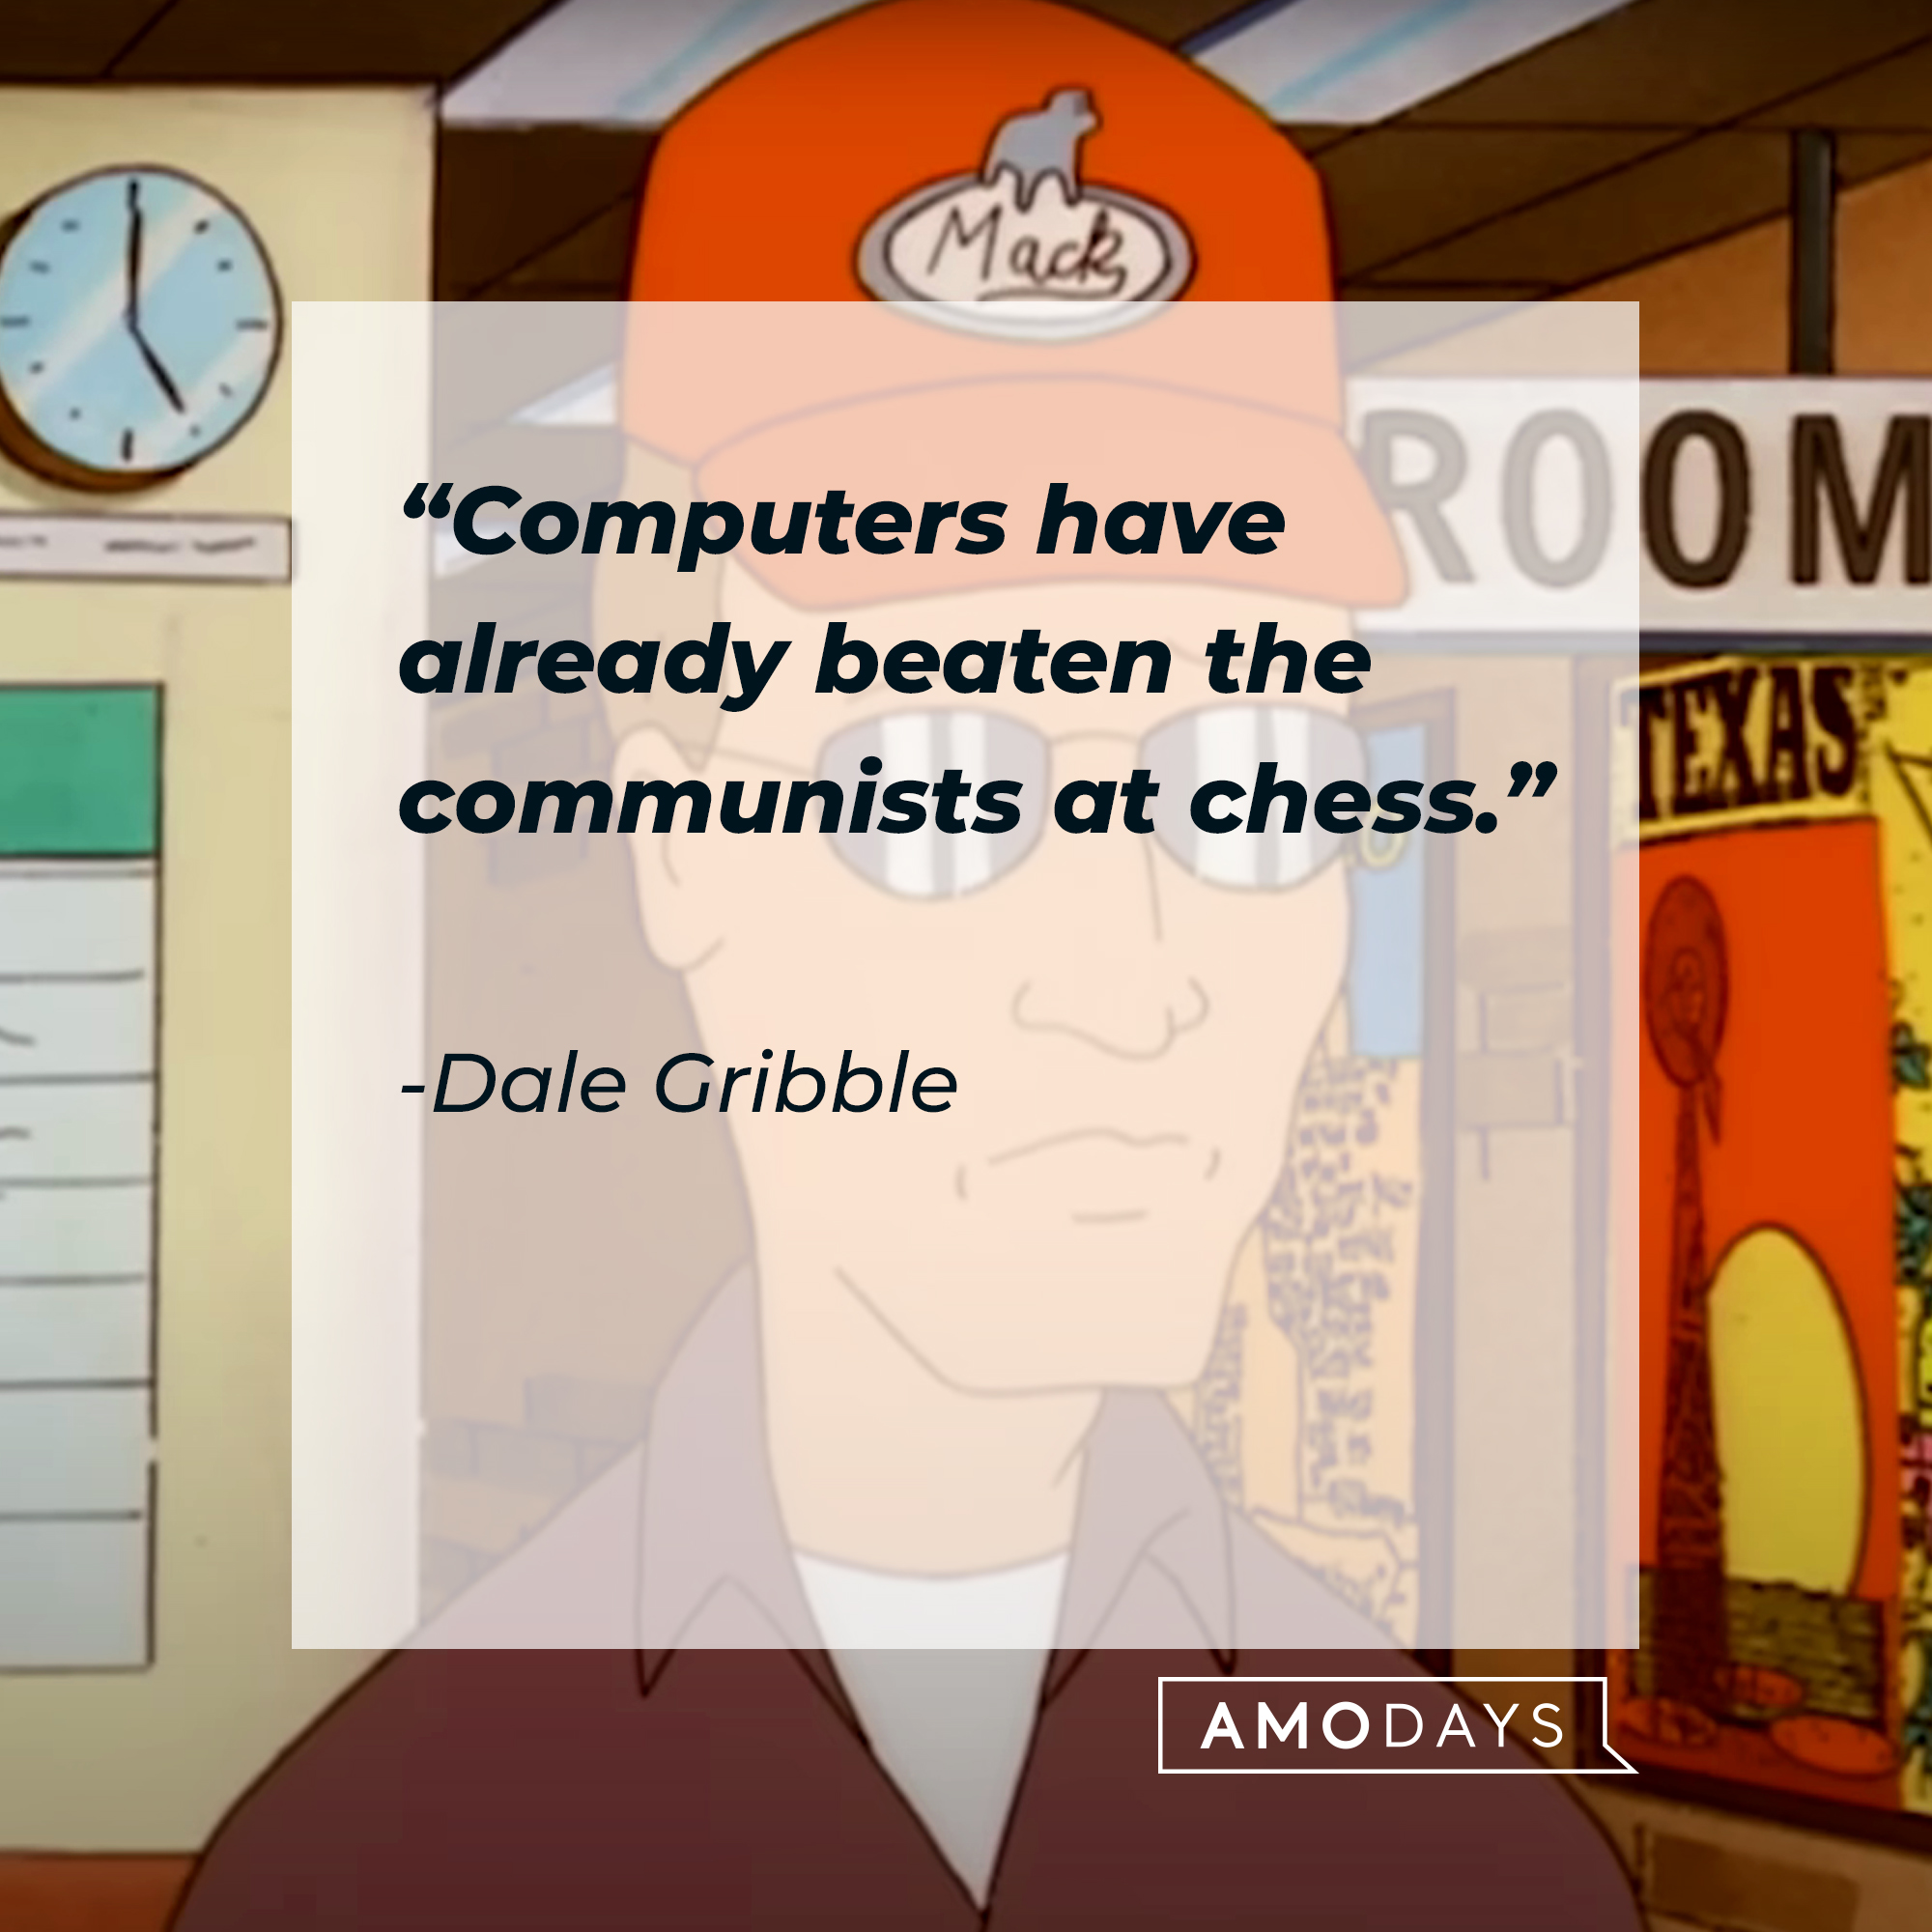 Dale Gribble, with his quote: “Computers have already beaten the communists at chess.” | Source: Youtube.com/adultswim